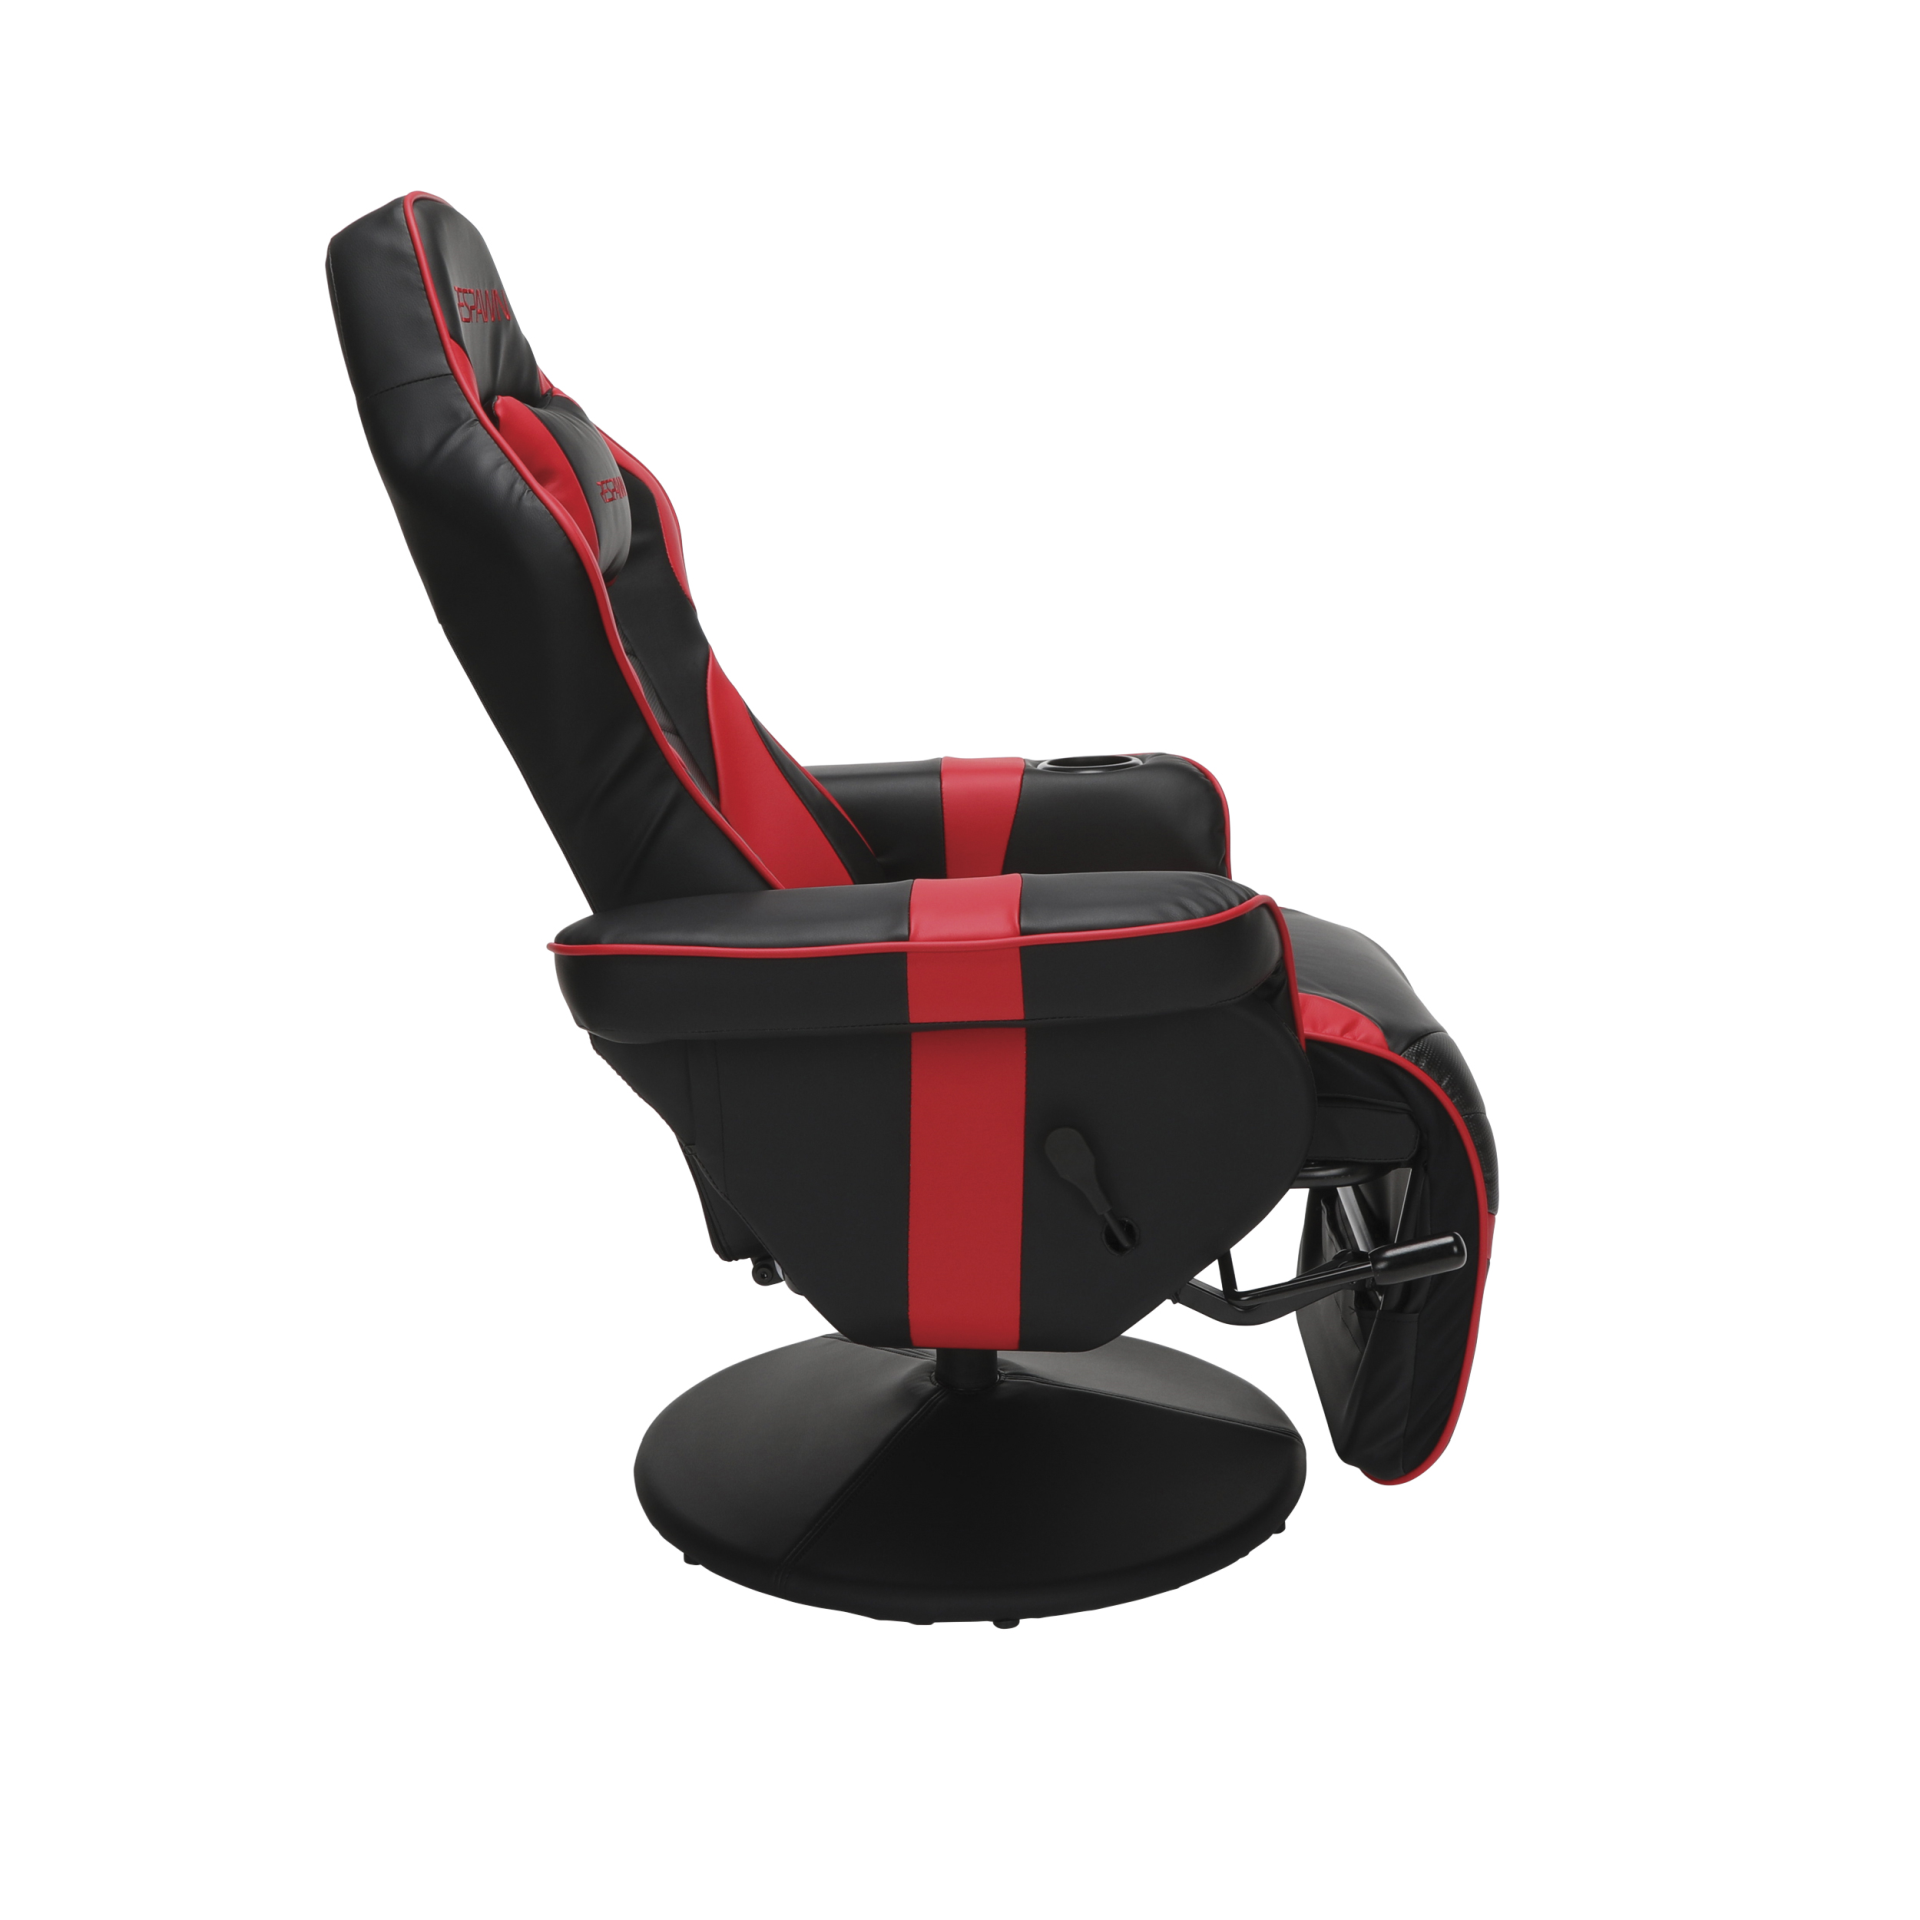 RESPAWN RSP-900 Gaming Recliner #29